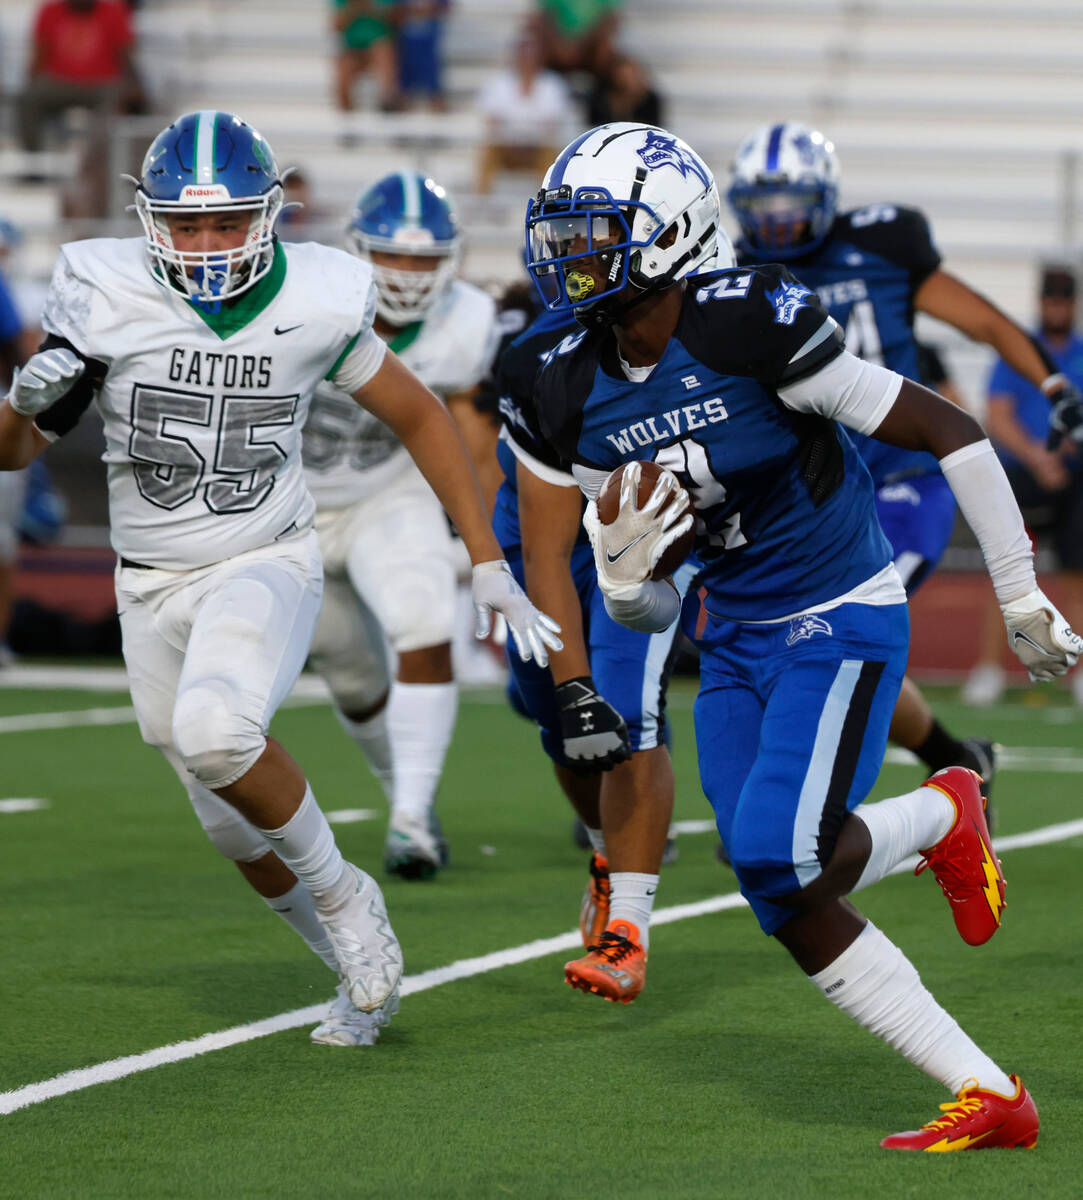 Basic High's wide receiver Chrey Traylor (2) runs with ball against Green Valley High's defensi ...